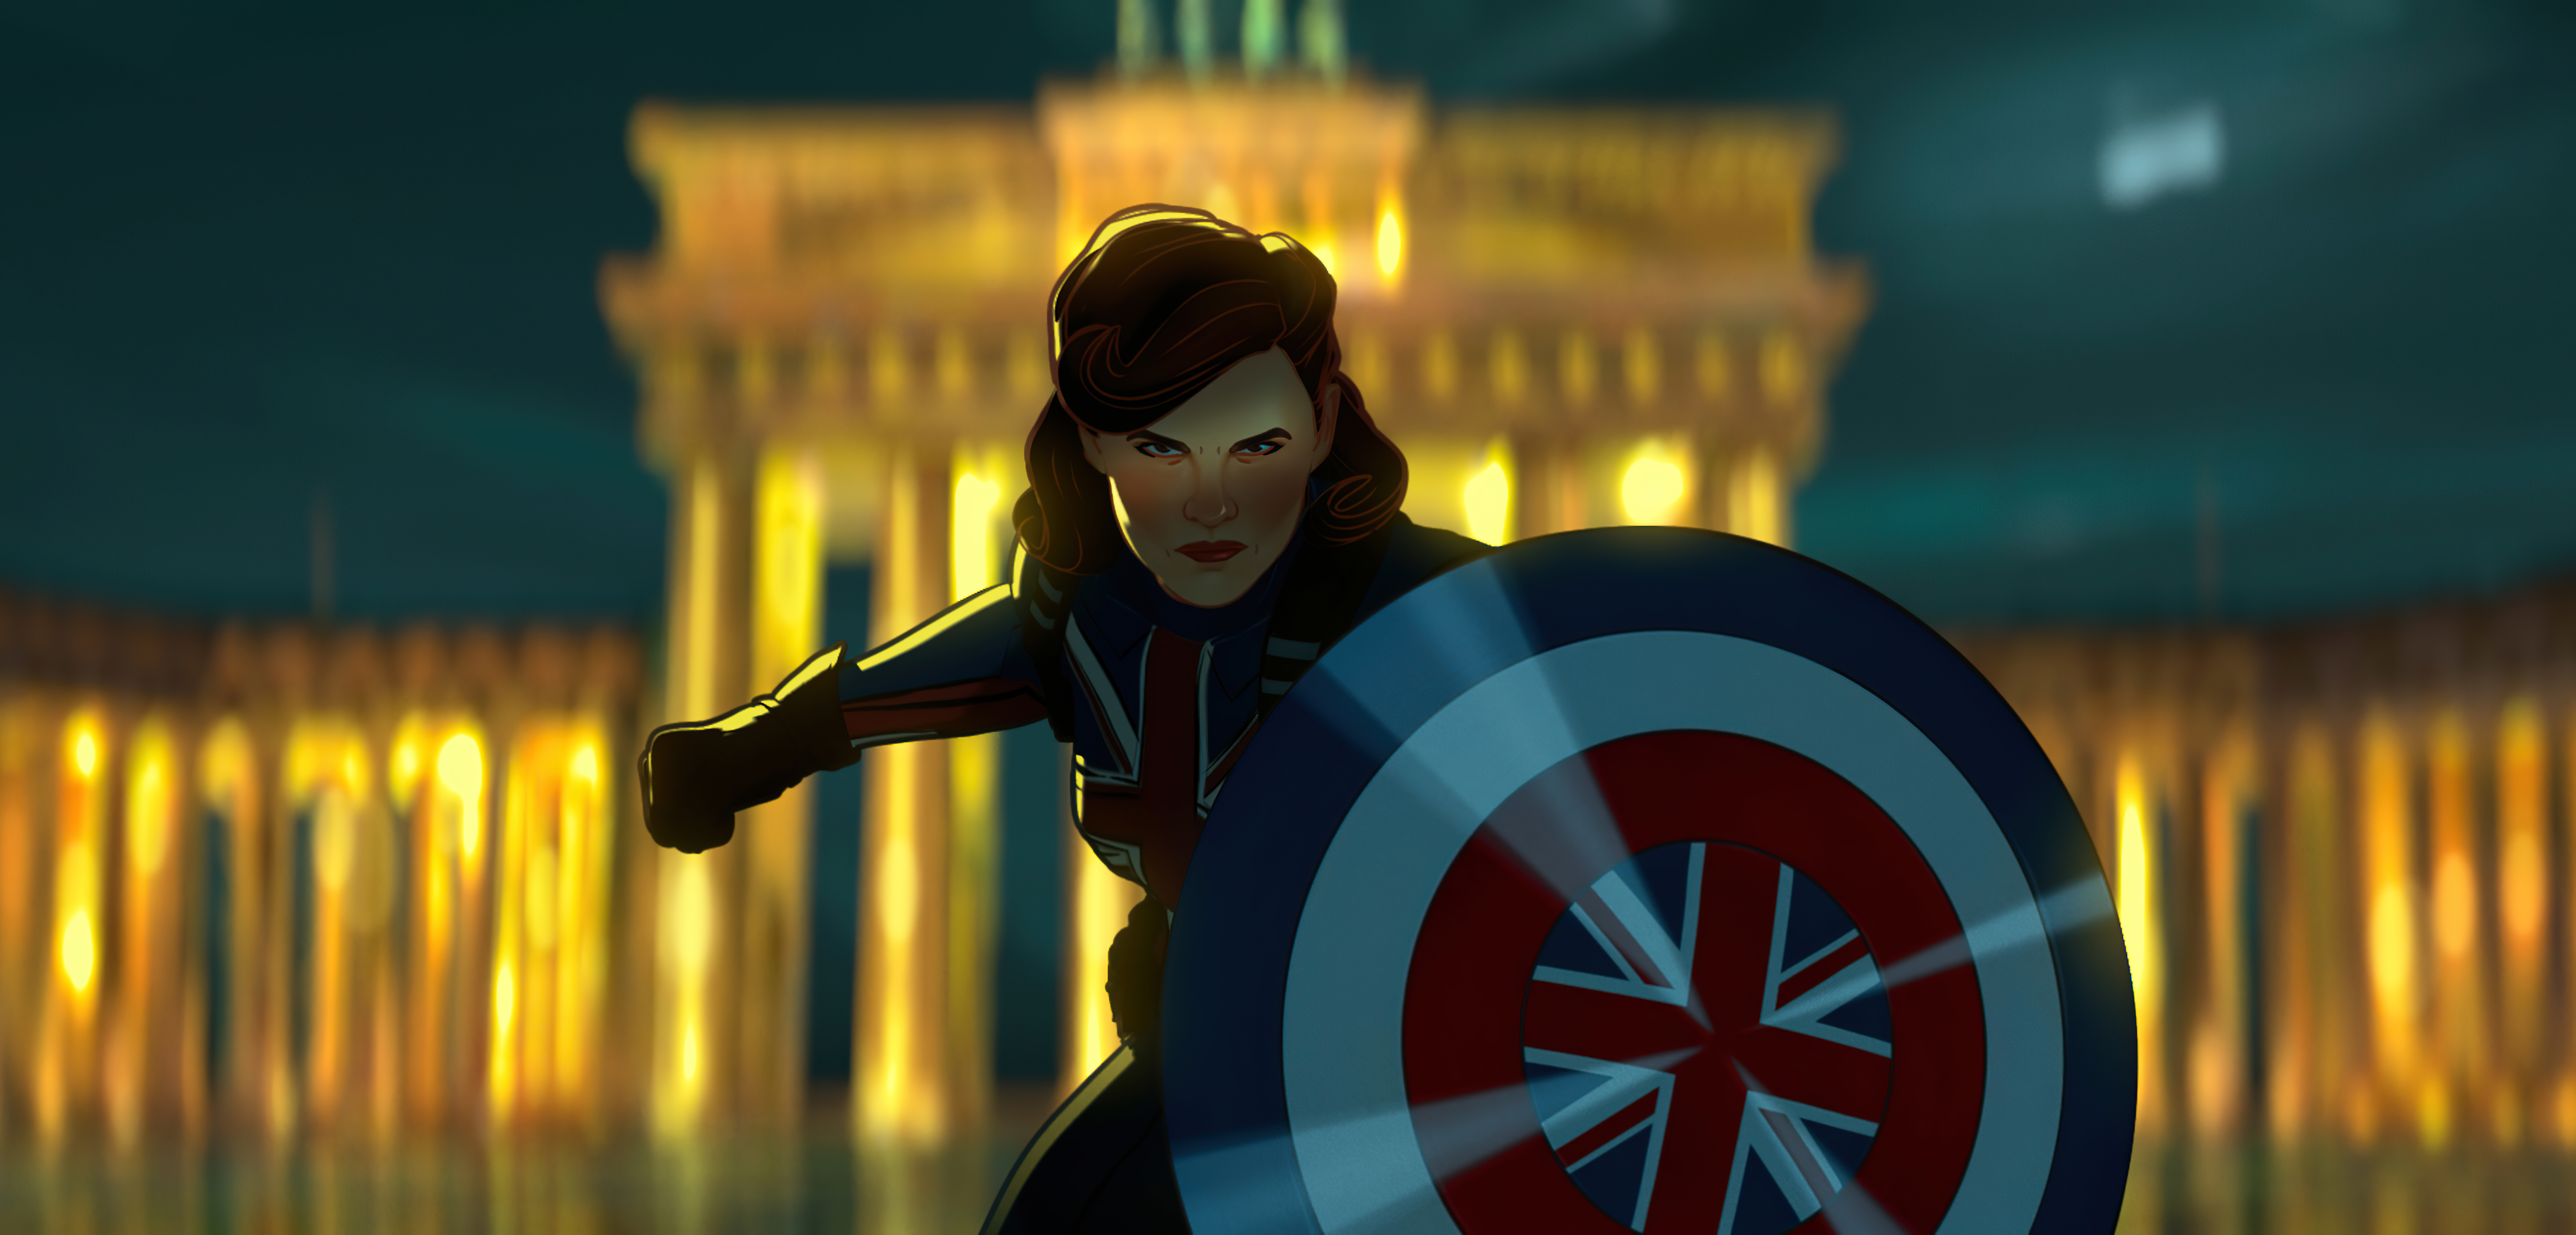 Peggy Carter As Captain America In What If Tv Series, HD Tv Shows, 4k Wallpaper, Image, Background, Photo and Picture